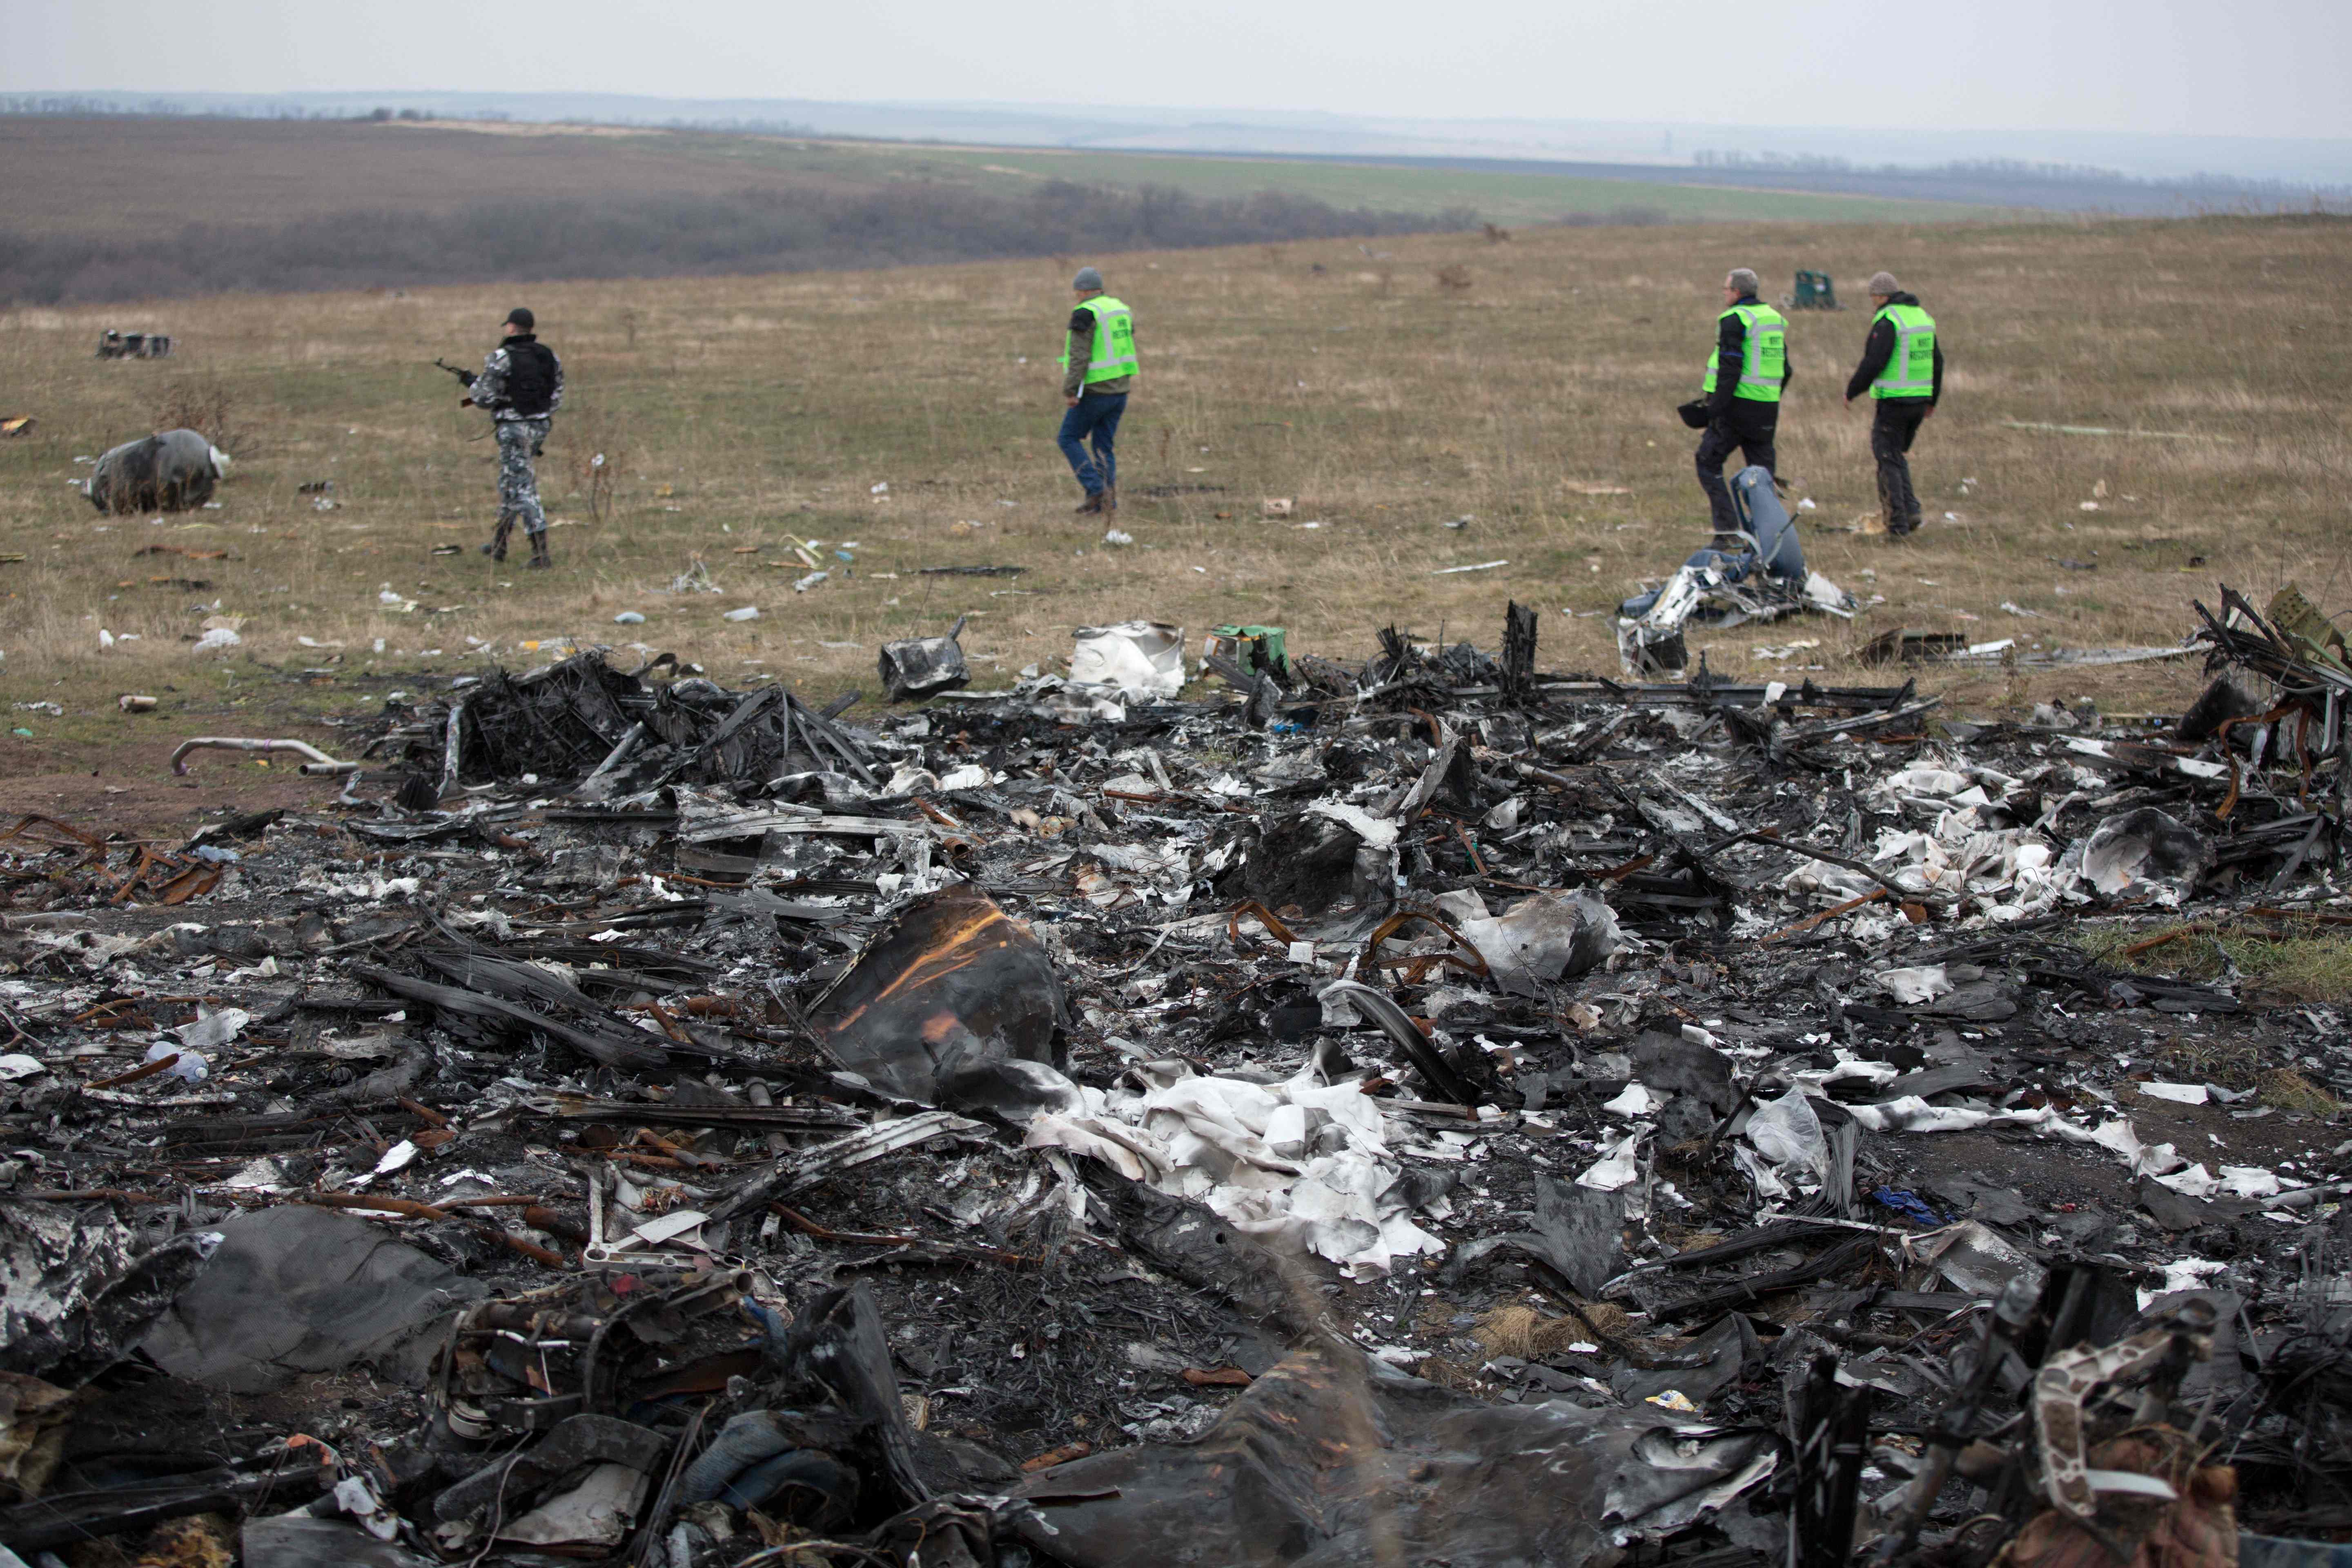 The Malaysia Airlines plane was shot down over Donetsk, in the east of Ukraine, killing all 298 on board